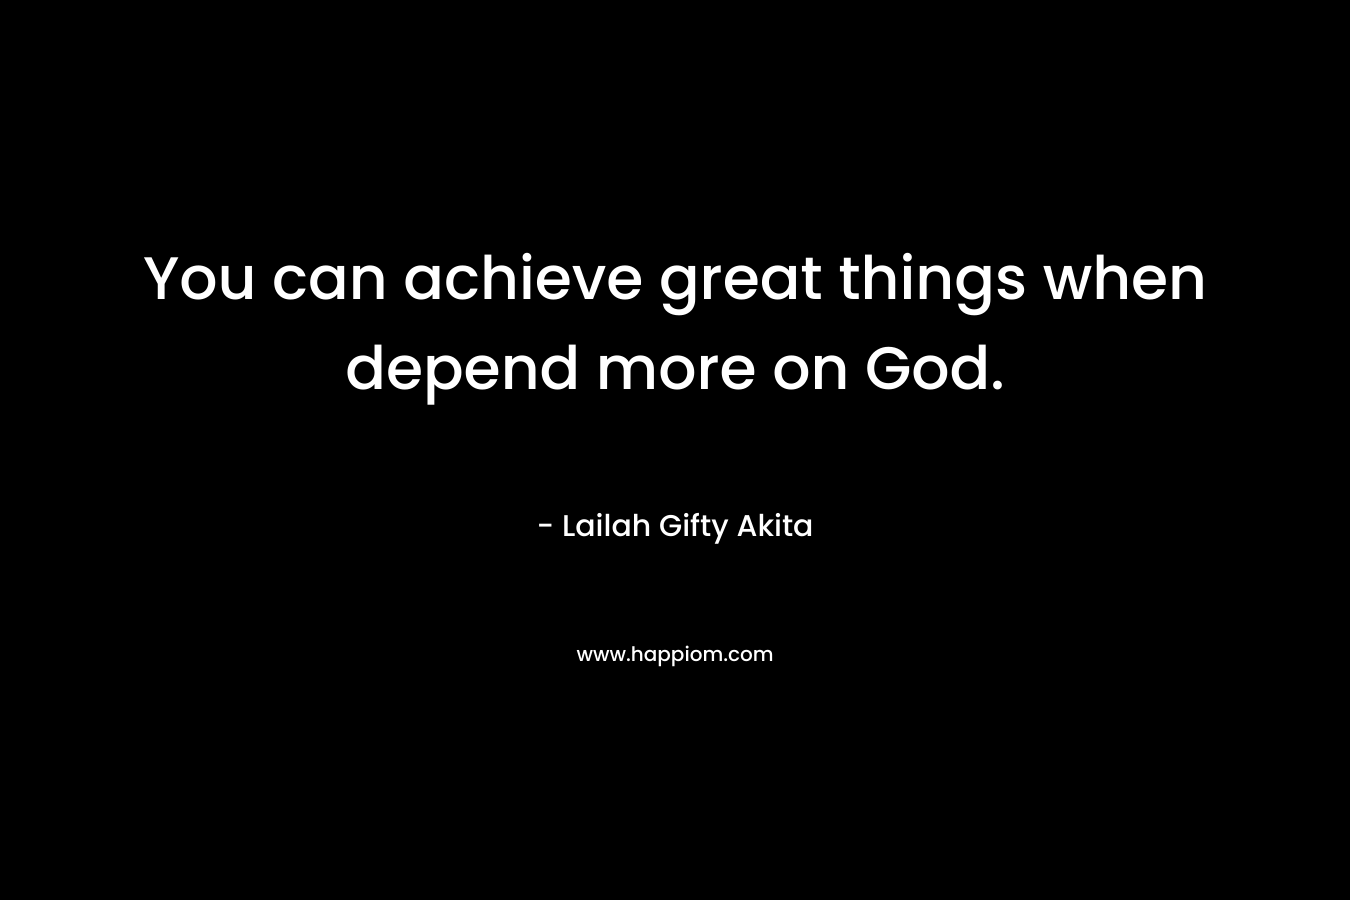 You can achieve great things when depend more on God.